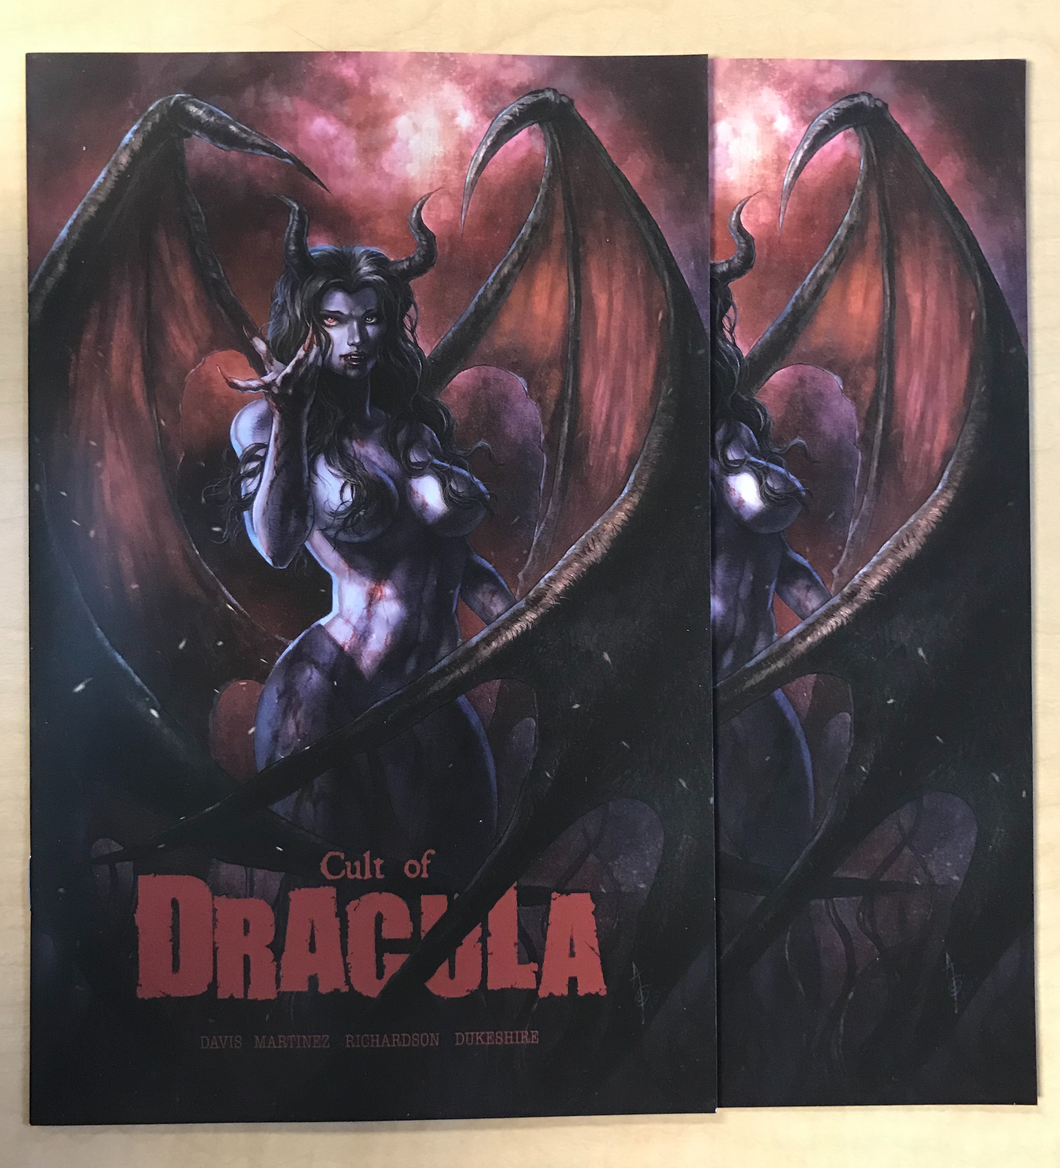 Cult of Dracula #1 Trade Dress & Virgin Variant 2 Book Set by Alan Quah Limited to 400 Second Sight Scorpion Comics Exclusive!!!